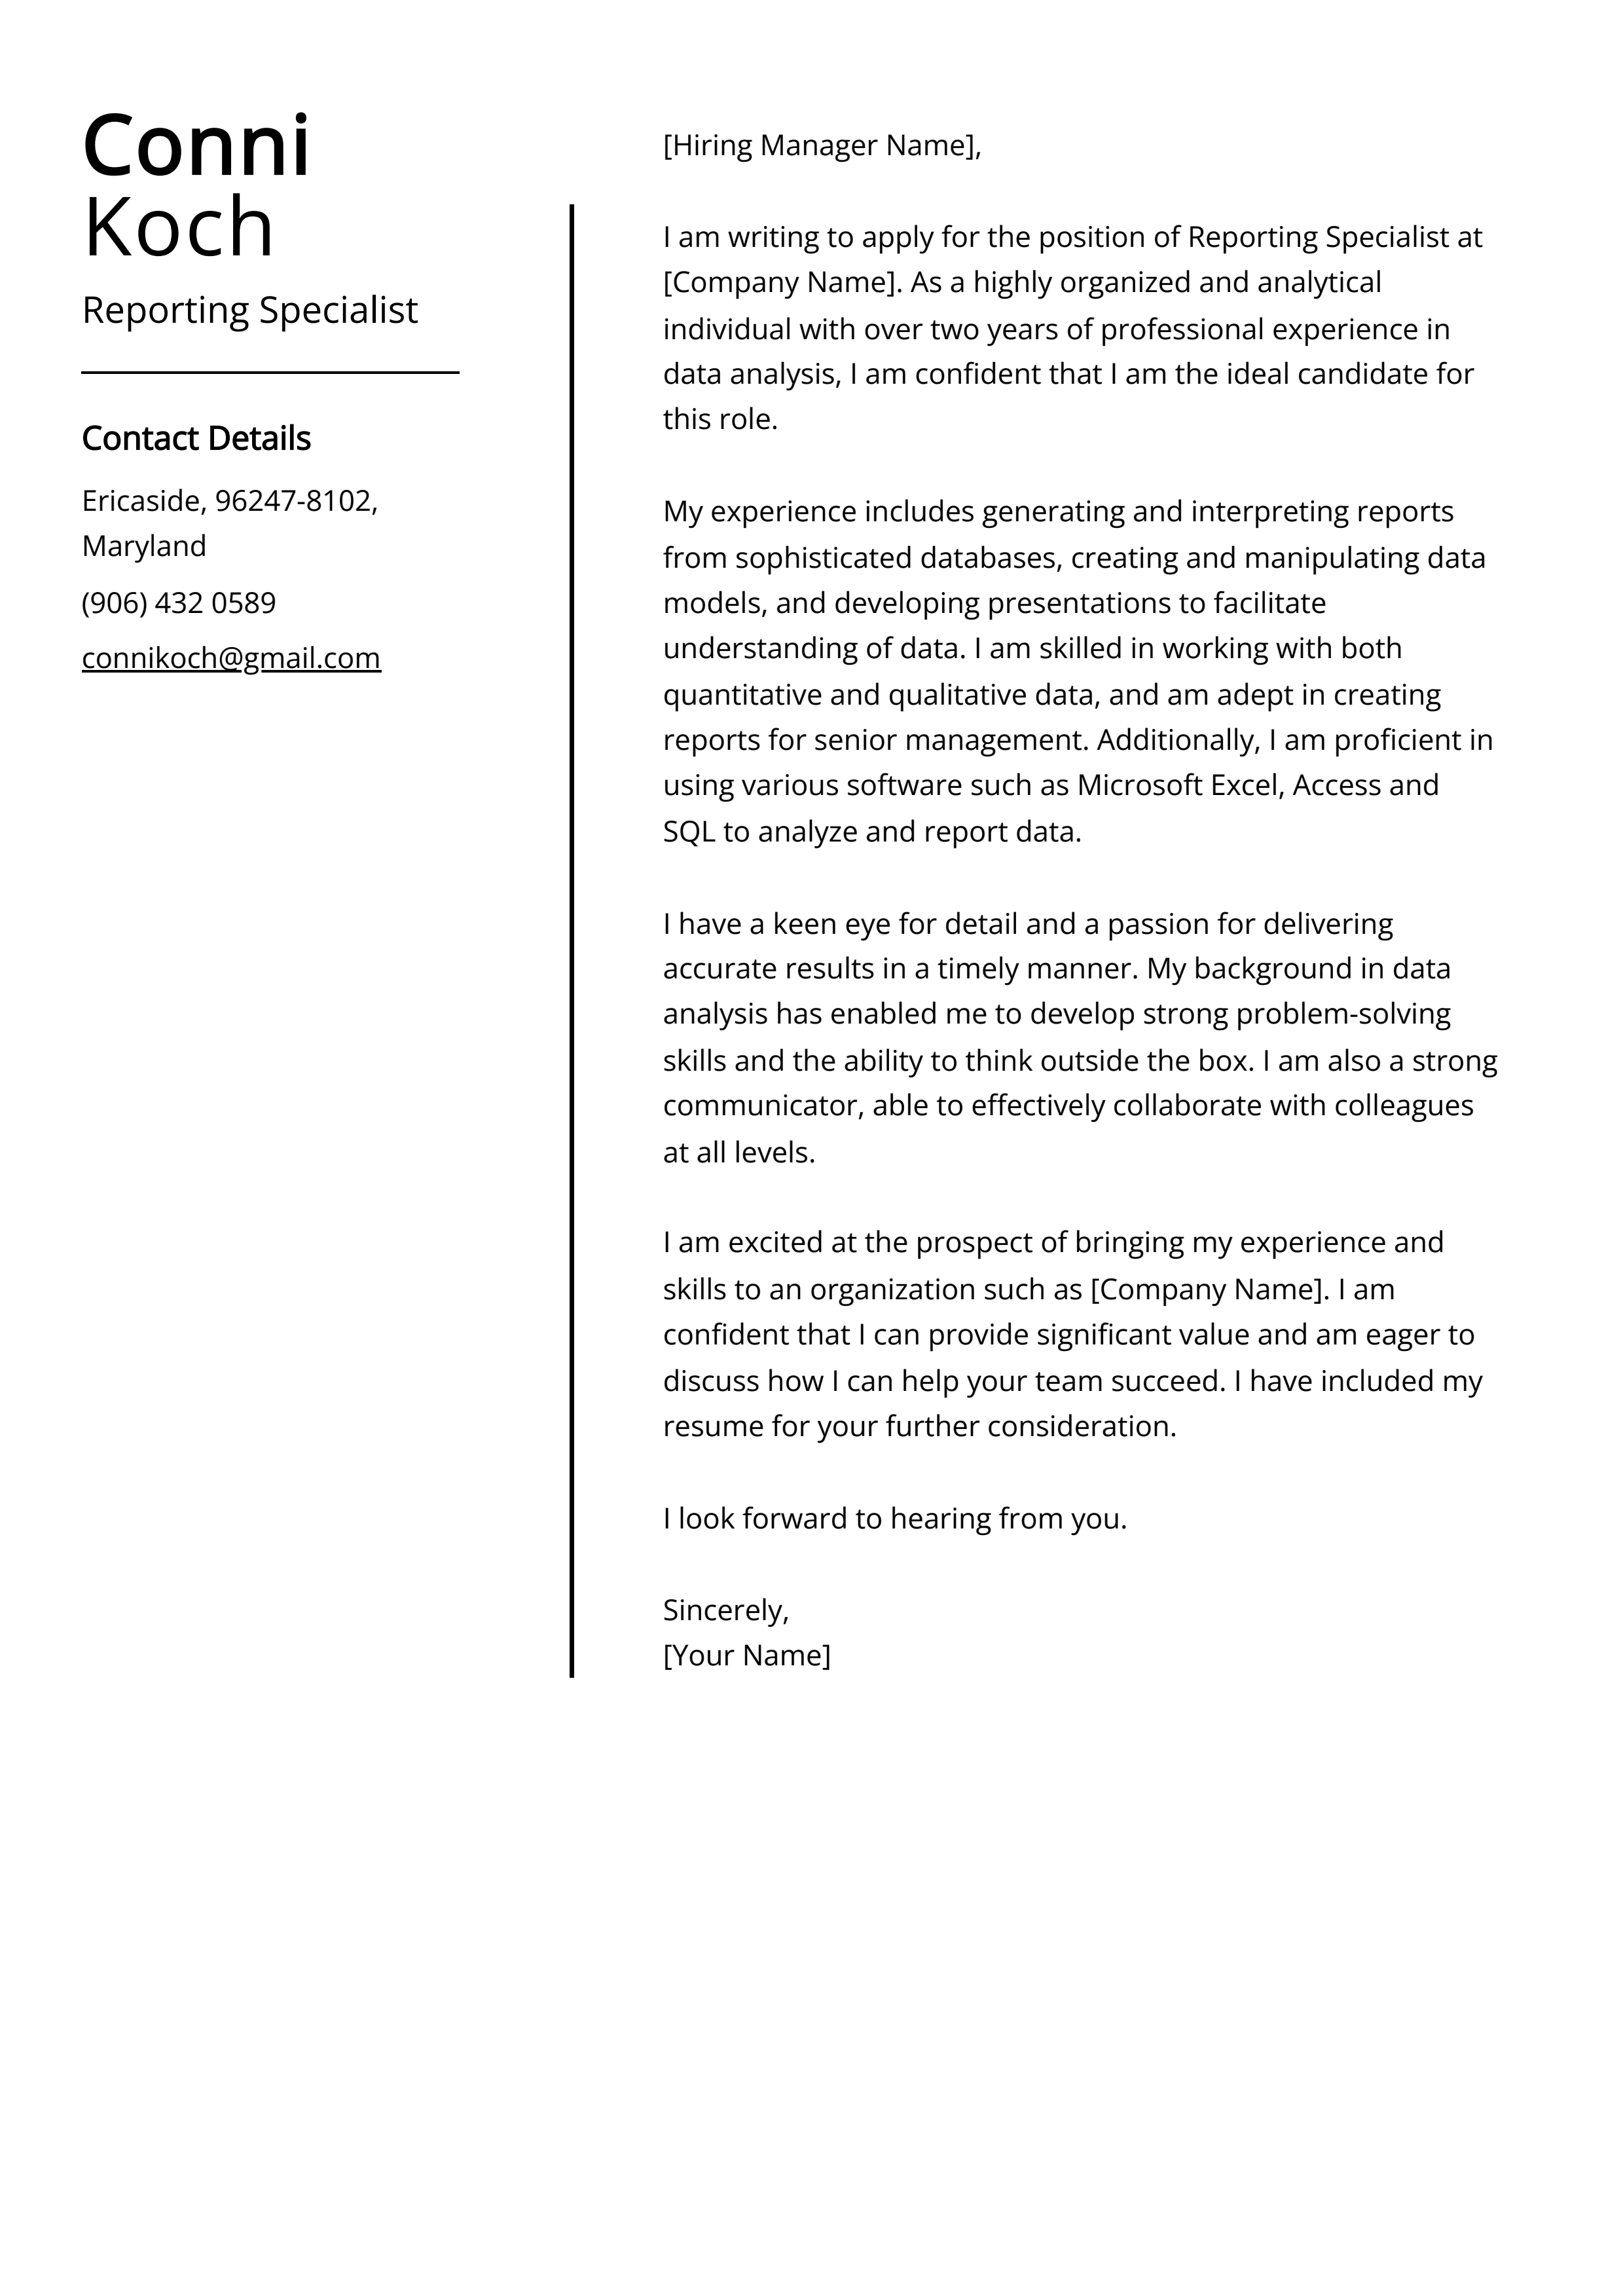 Reporting Specialist Cover Letter Example